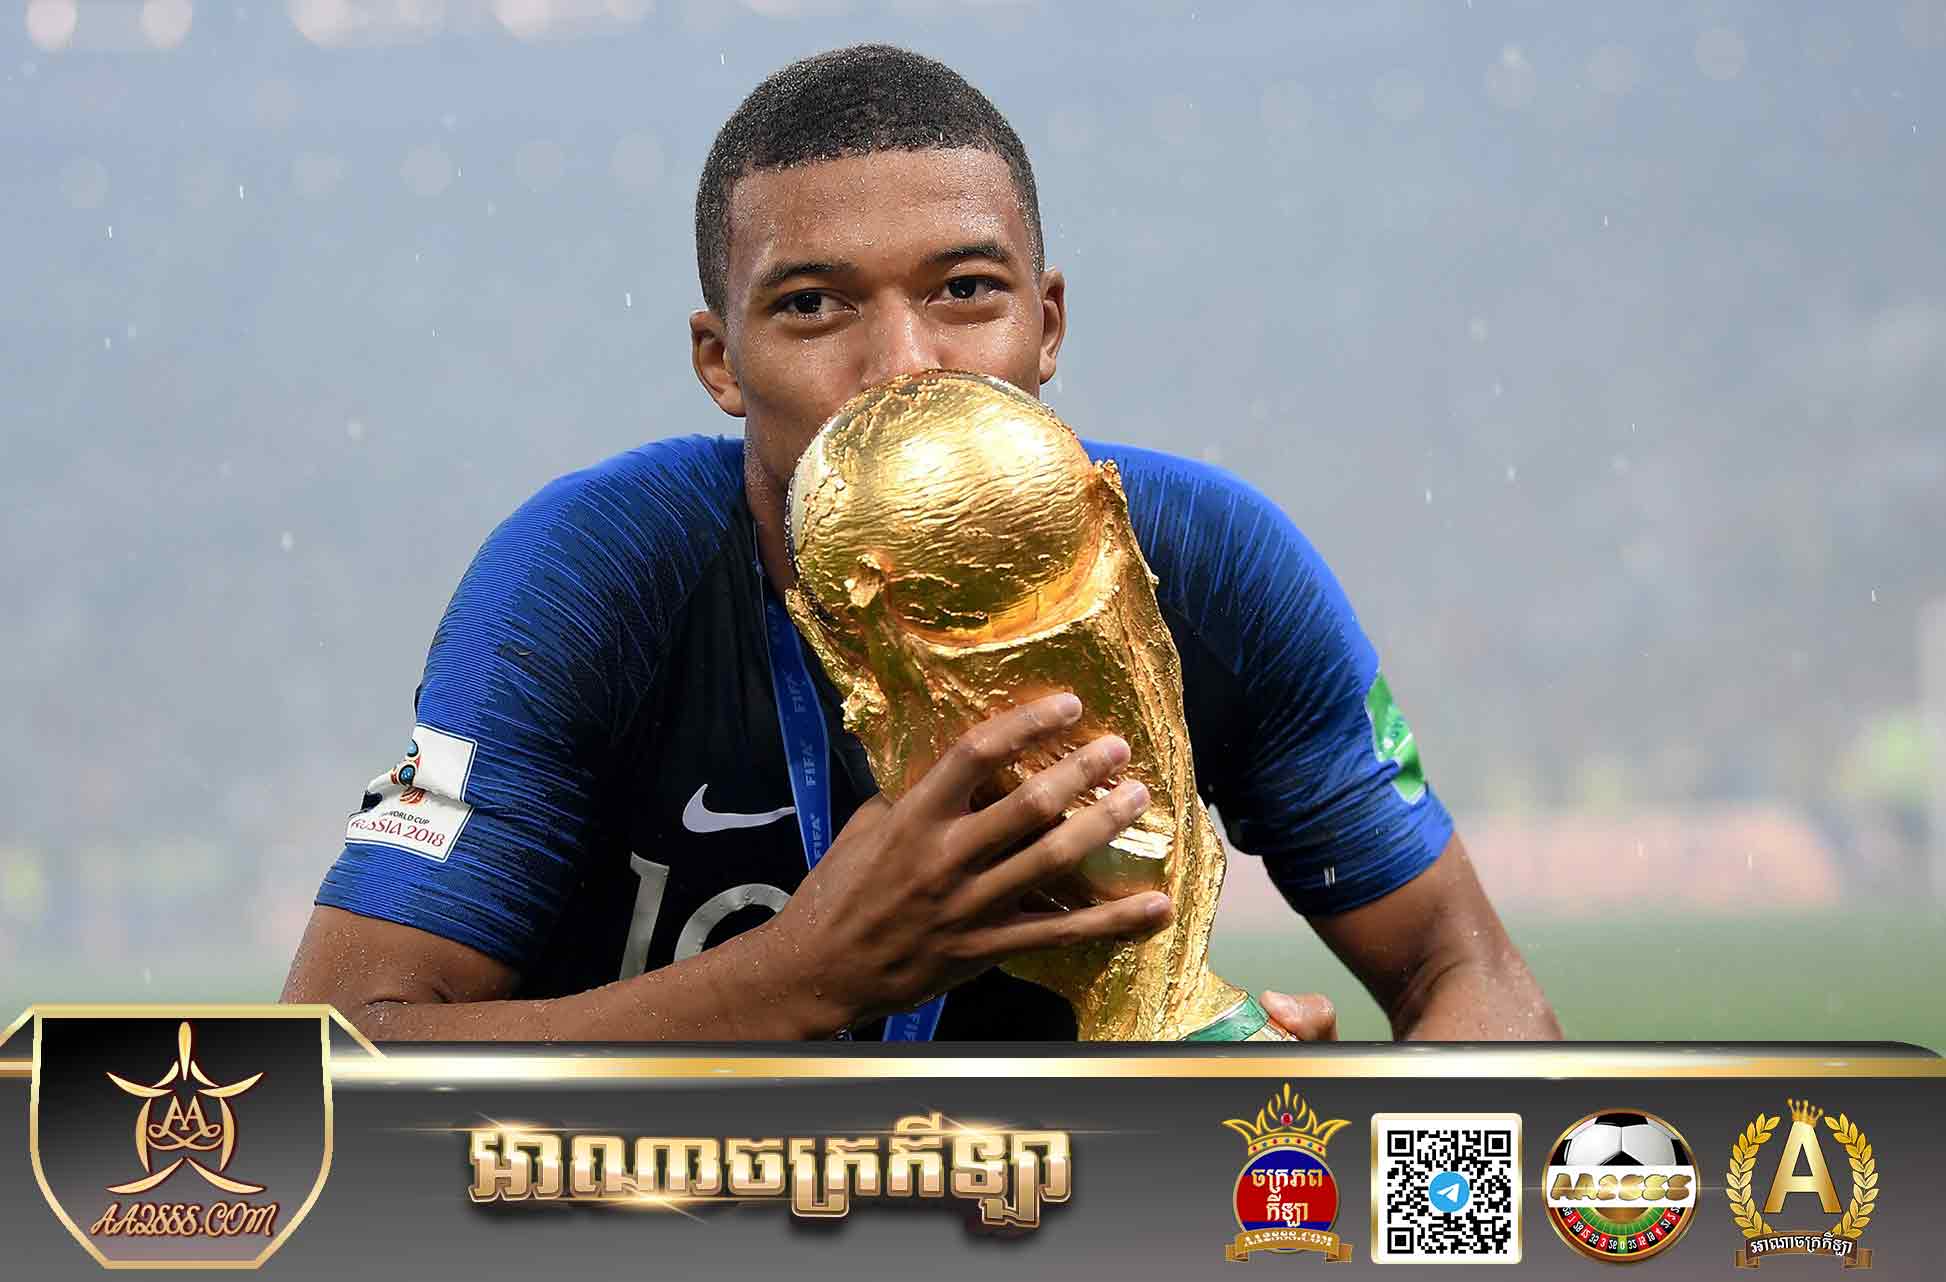 Mbappe is french key player